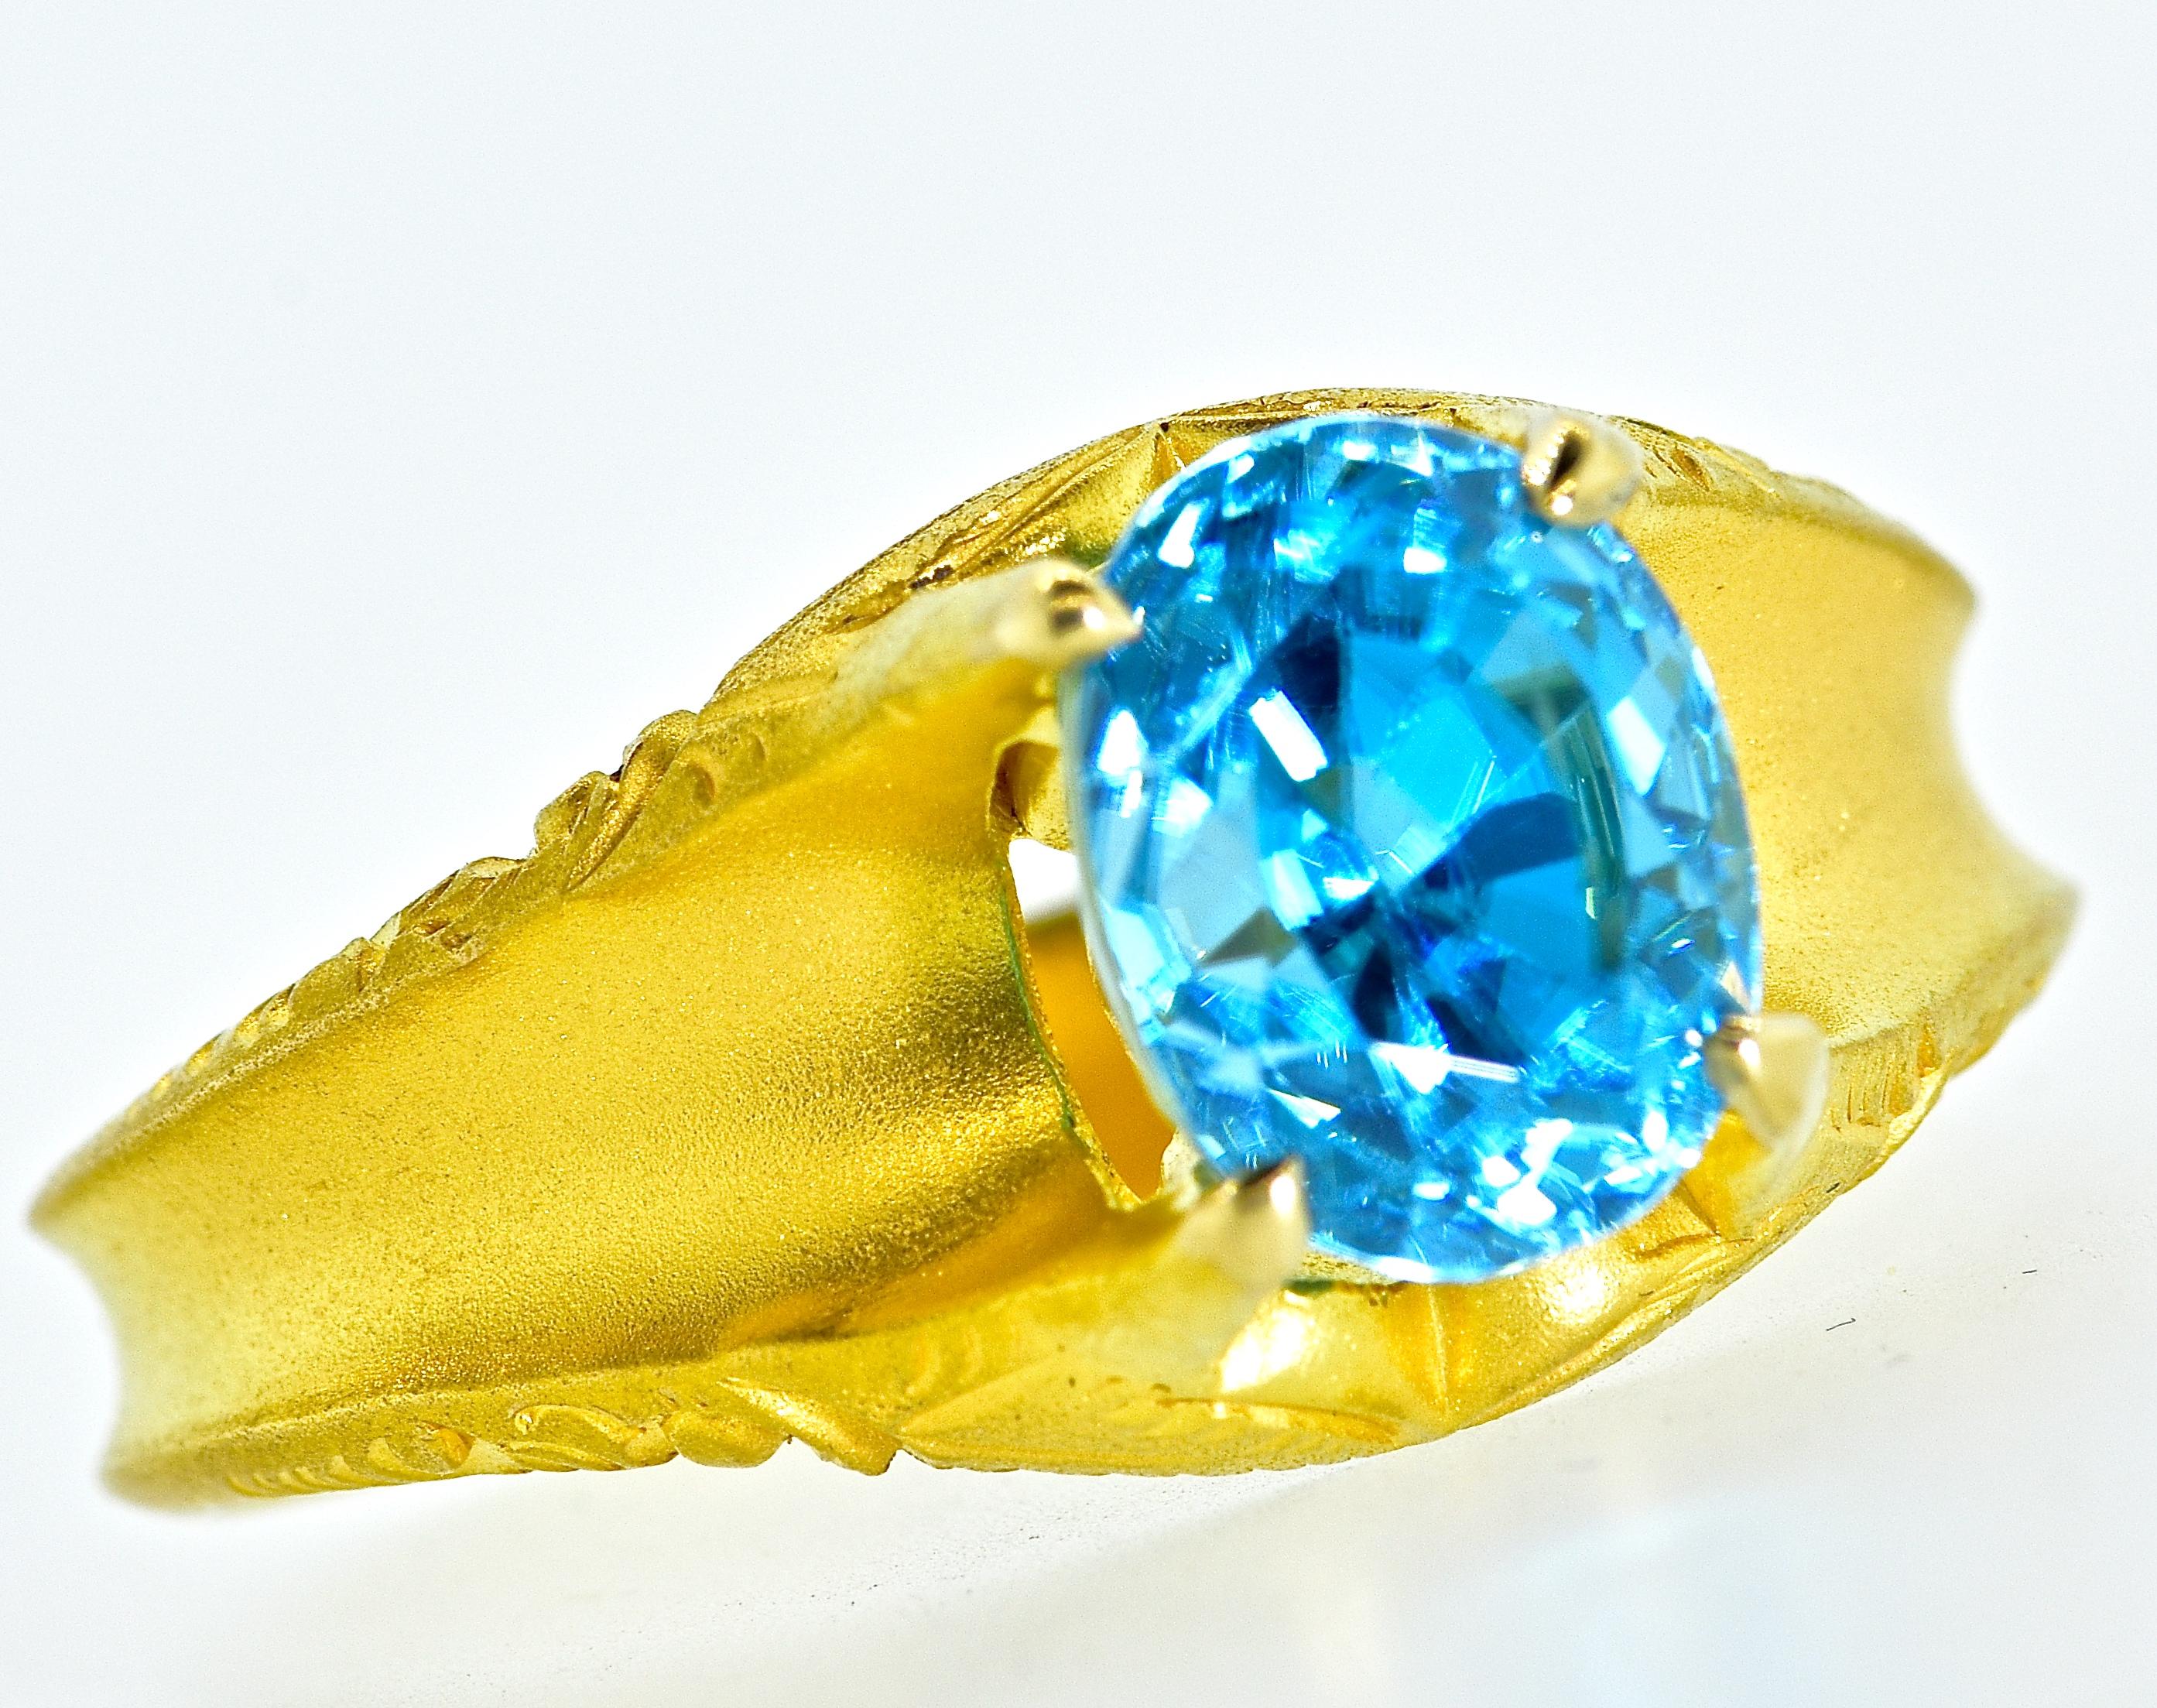 Victorian 18K gold ring centering a very fine natural blue zircon weighing an estimated 7.50 cts.  This oval stone is intensely brilliant and a vivid blue color and free of inclusions. This Victorian ring is from the last quarter of the 19th